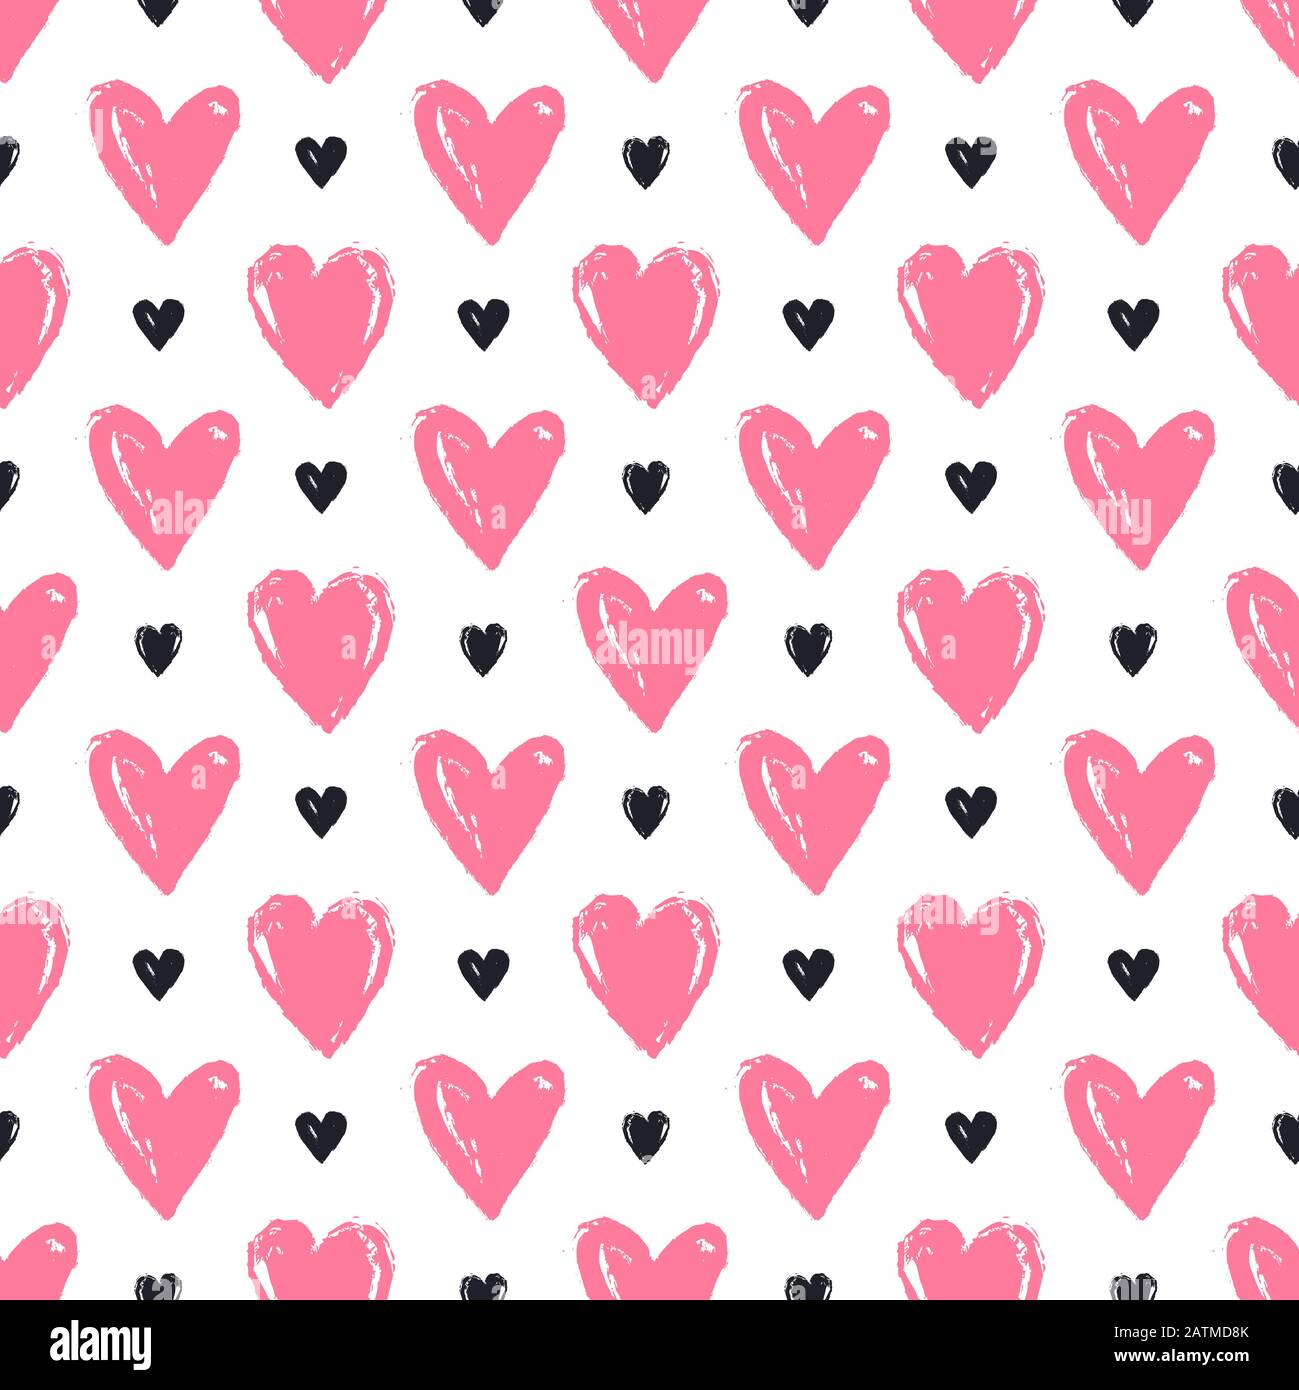 Seamless pattern with hand drawn hearts. White background and painted pink and black hearts. Romantic vector illustration for love, wedding or Valenti Stock Vector